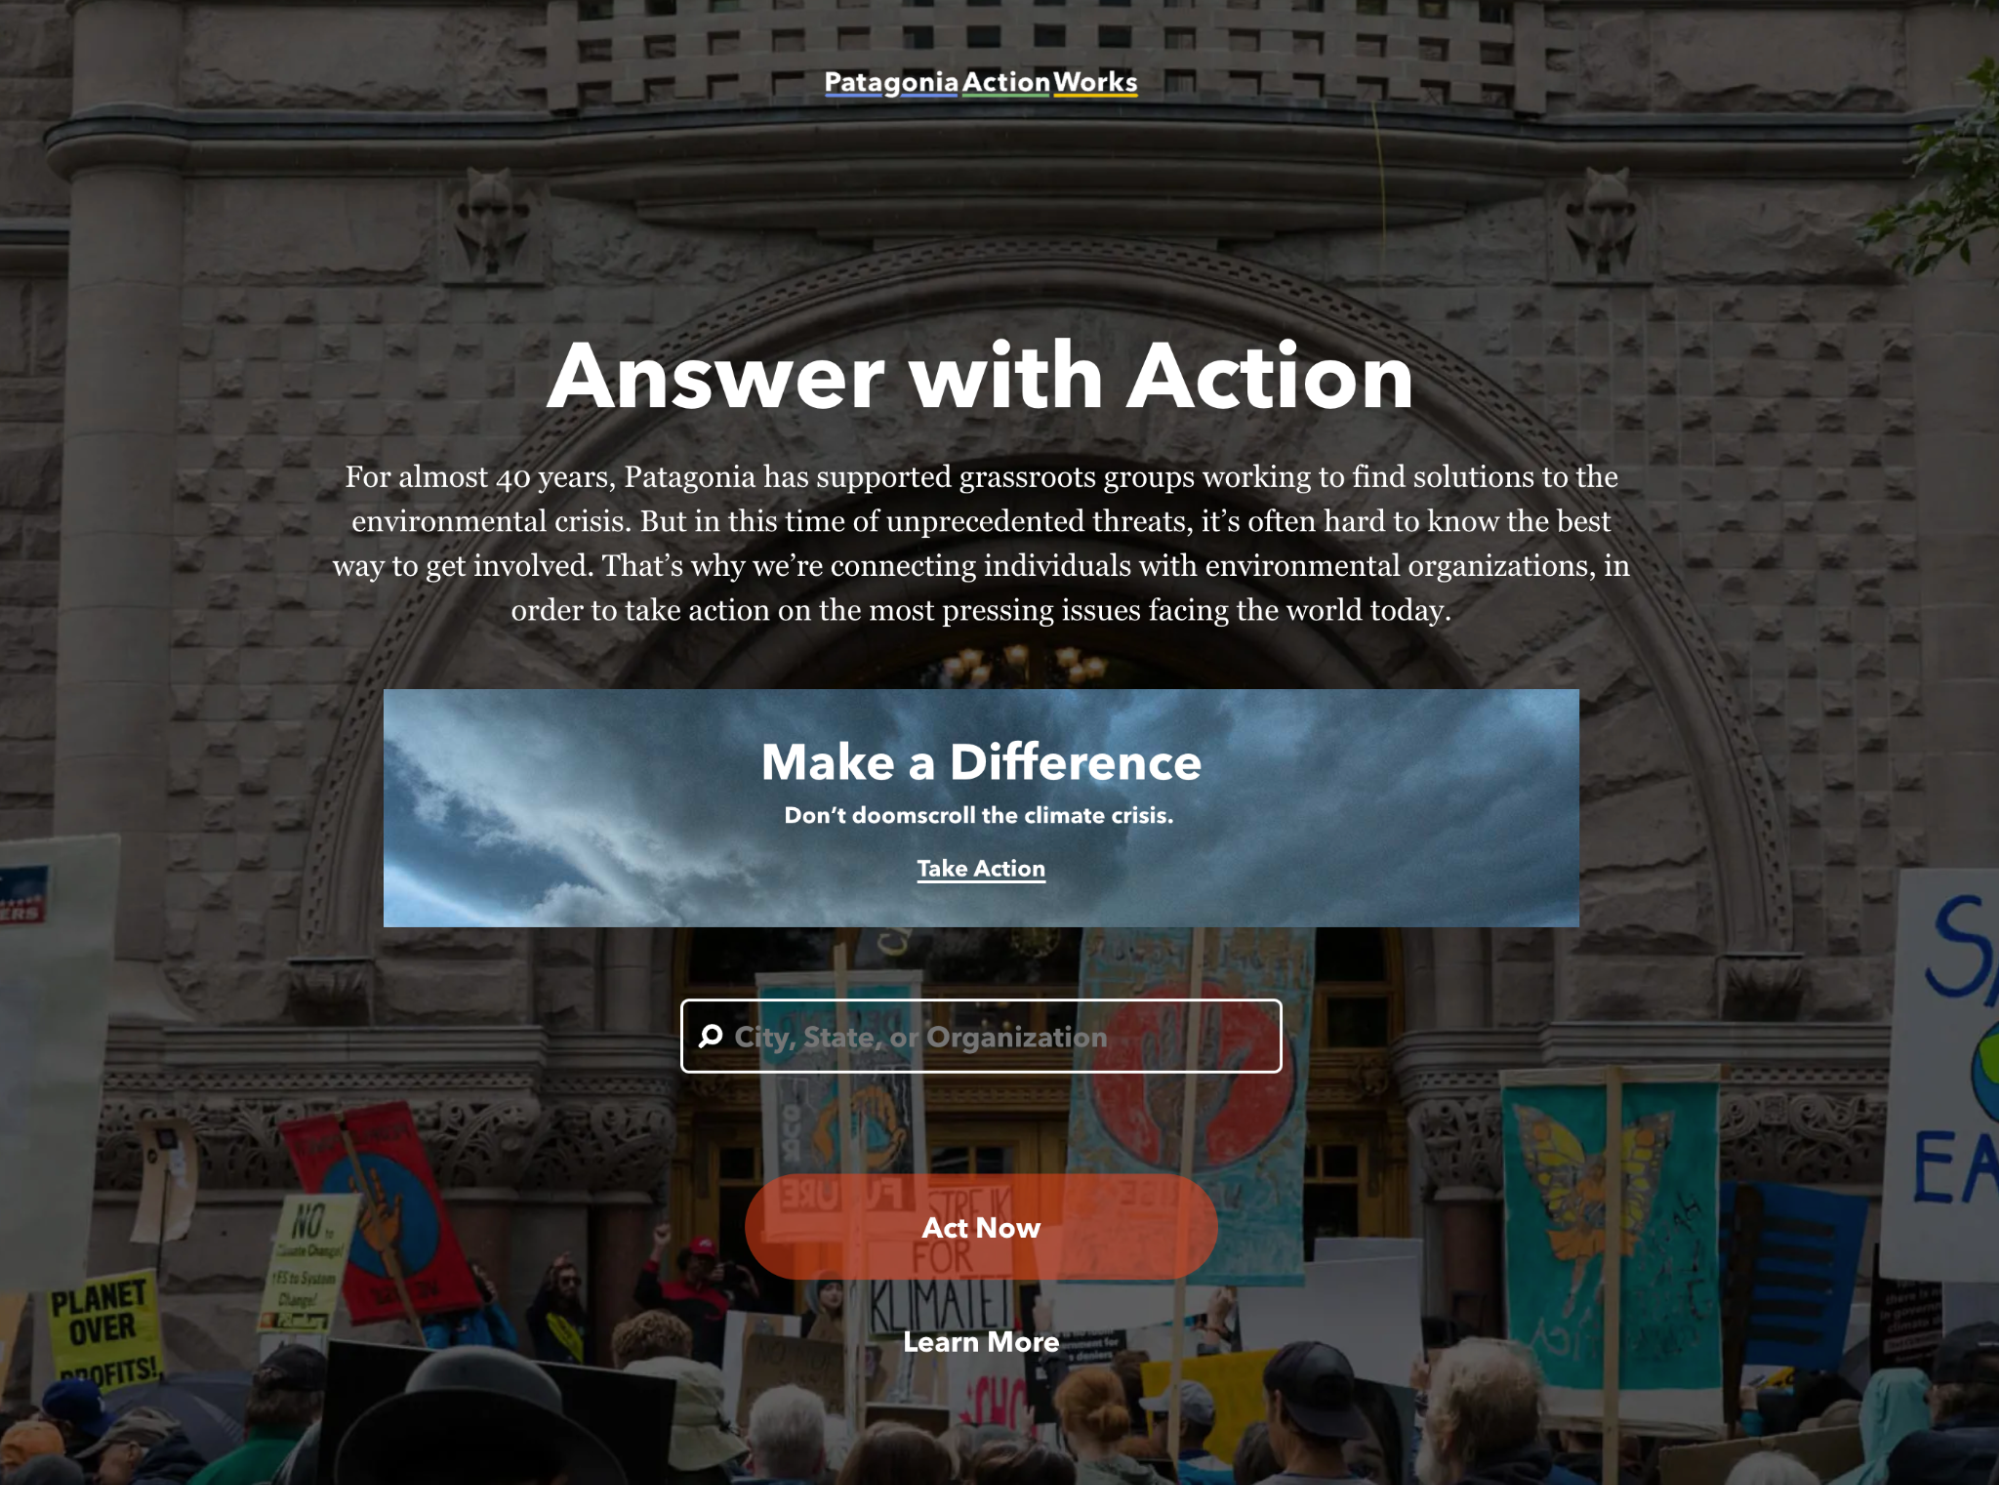 Example of Patagonia's Take Action campaign